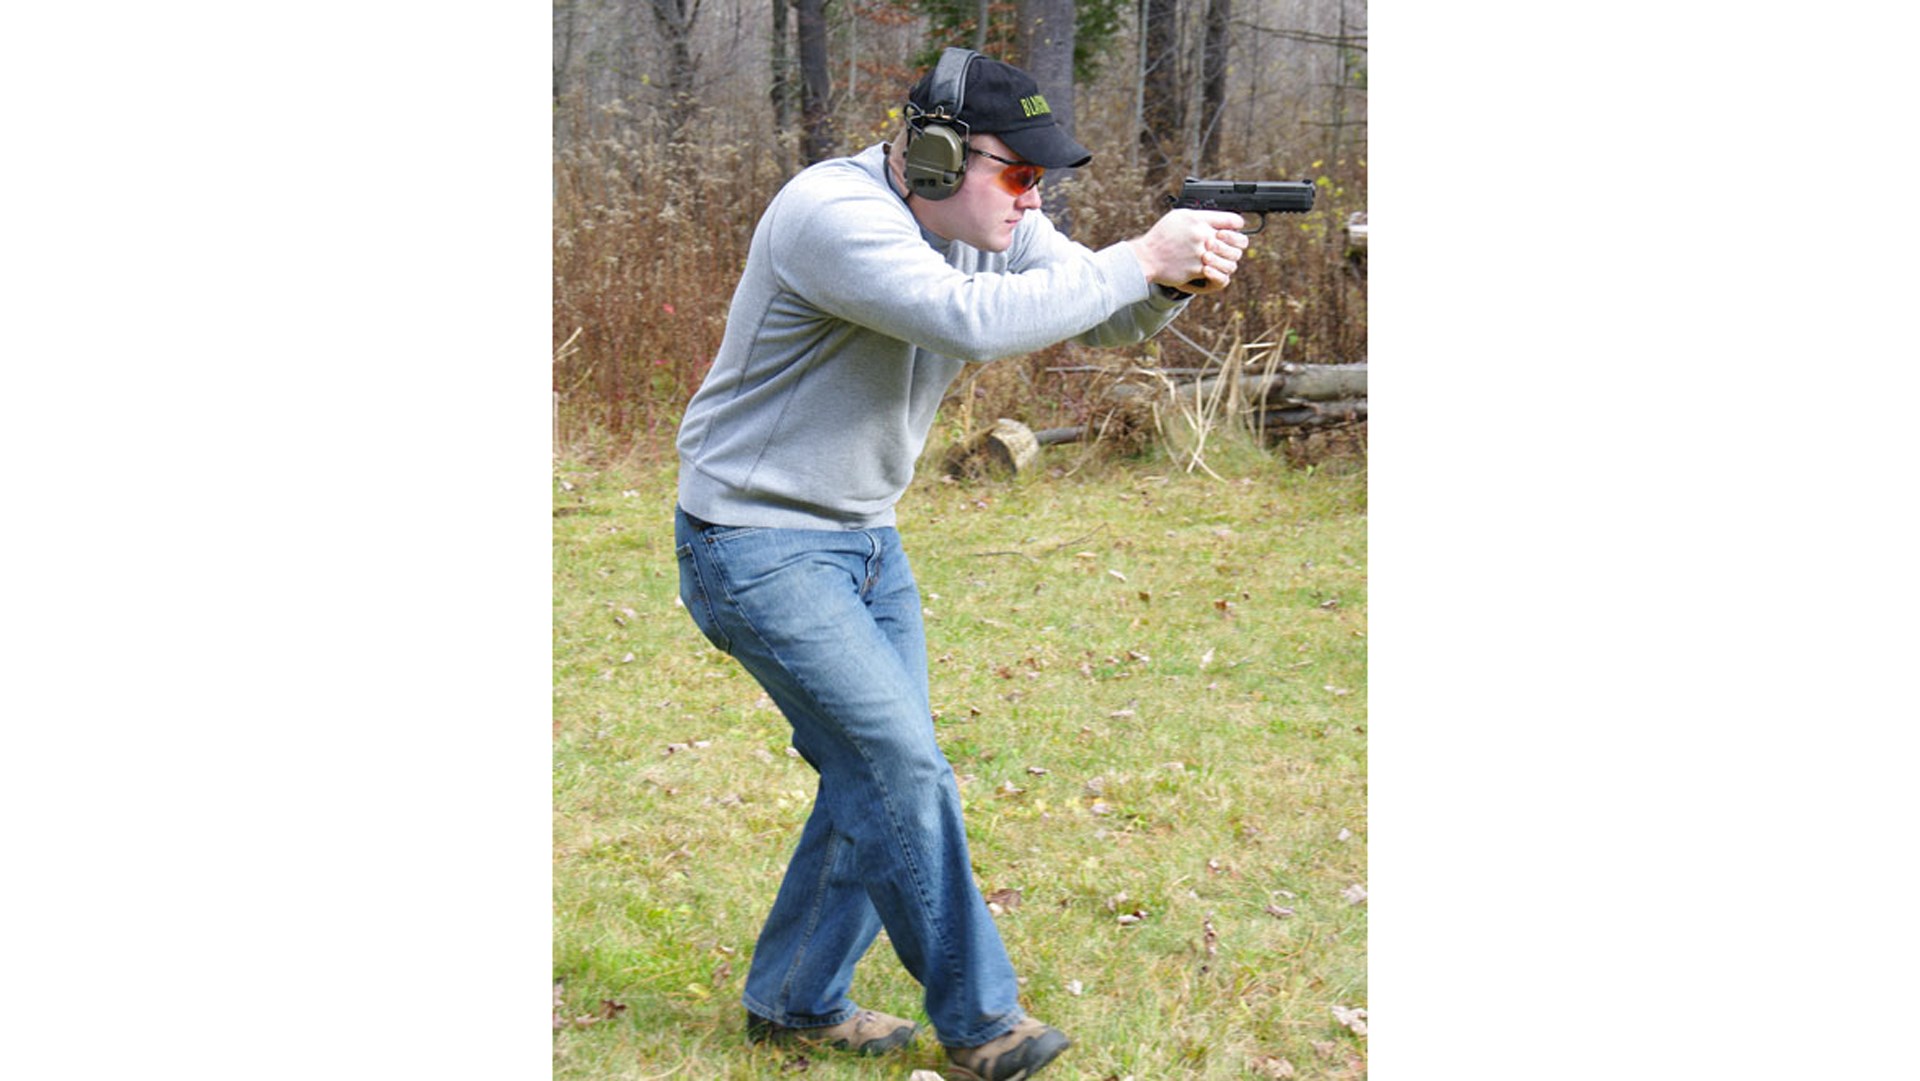 Man wearing jeans and gray longsleeve with ballcap and earmuffs walking while shooting handgun outdoors grass trees woods background